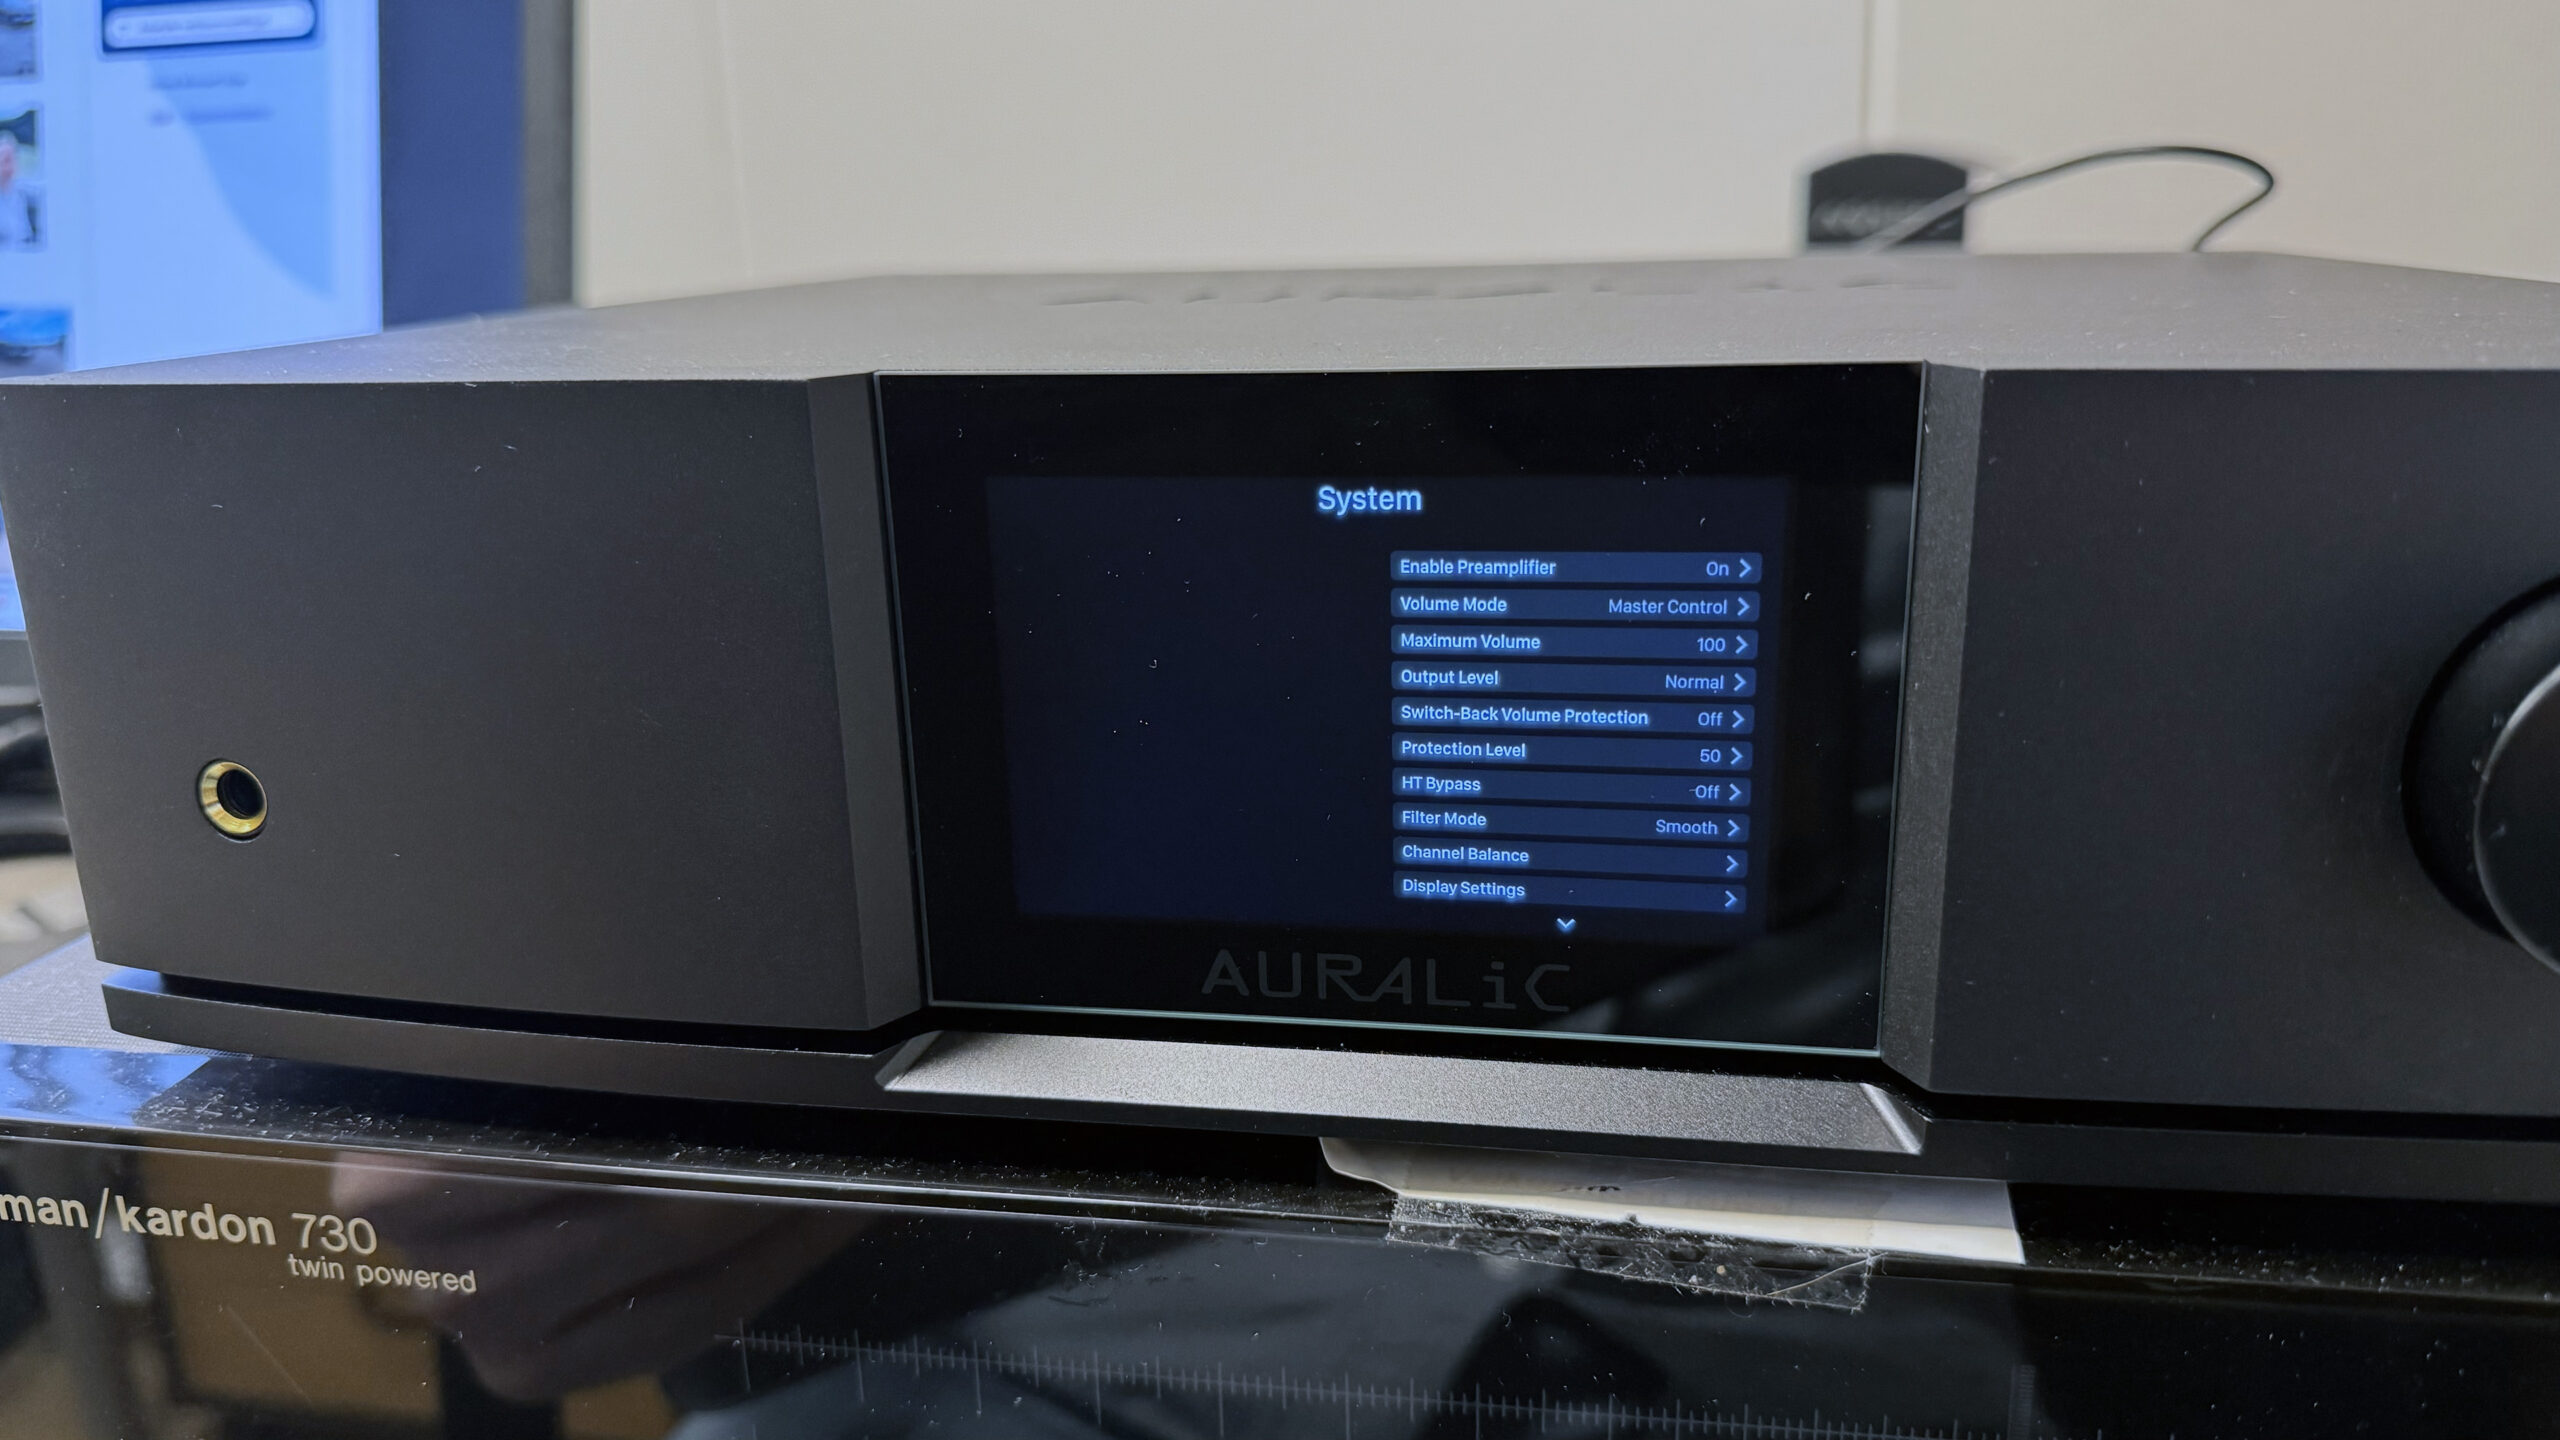 Auralic Altair G2.1 small fonts GeirNordby